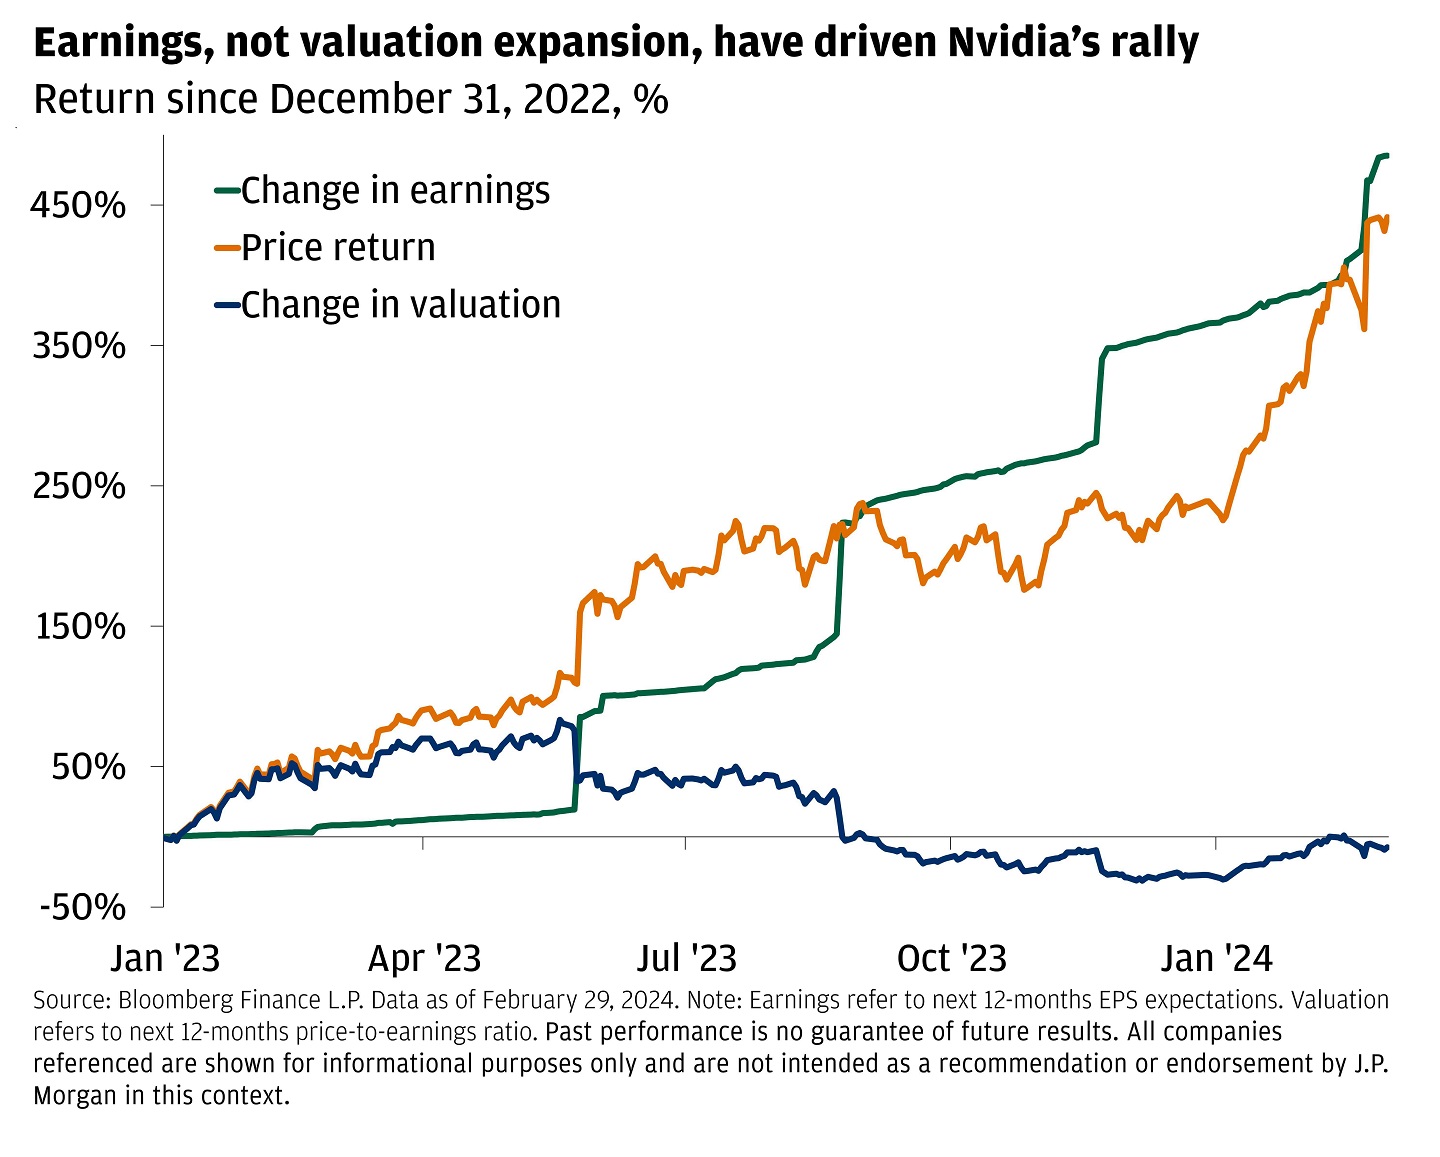 The chart shows the change in earnings, price, and valuation for Nvidia relative to December 31, 2022.